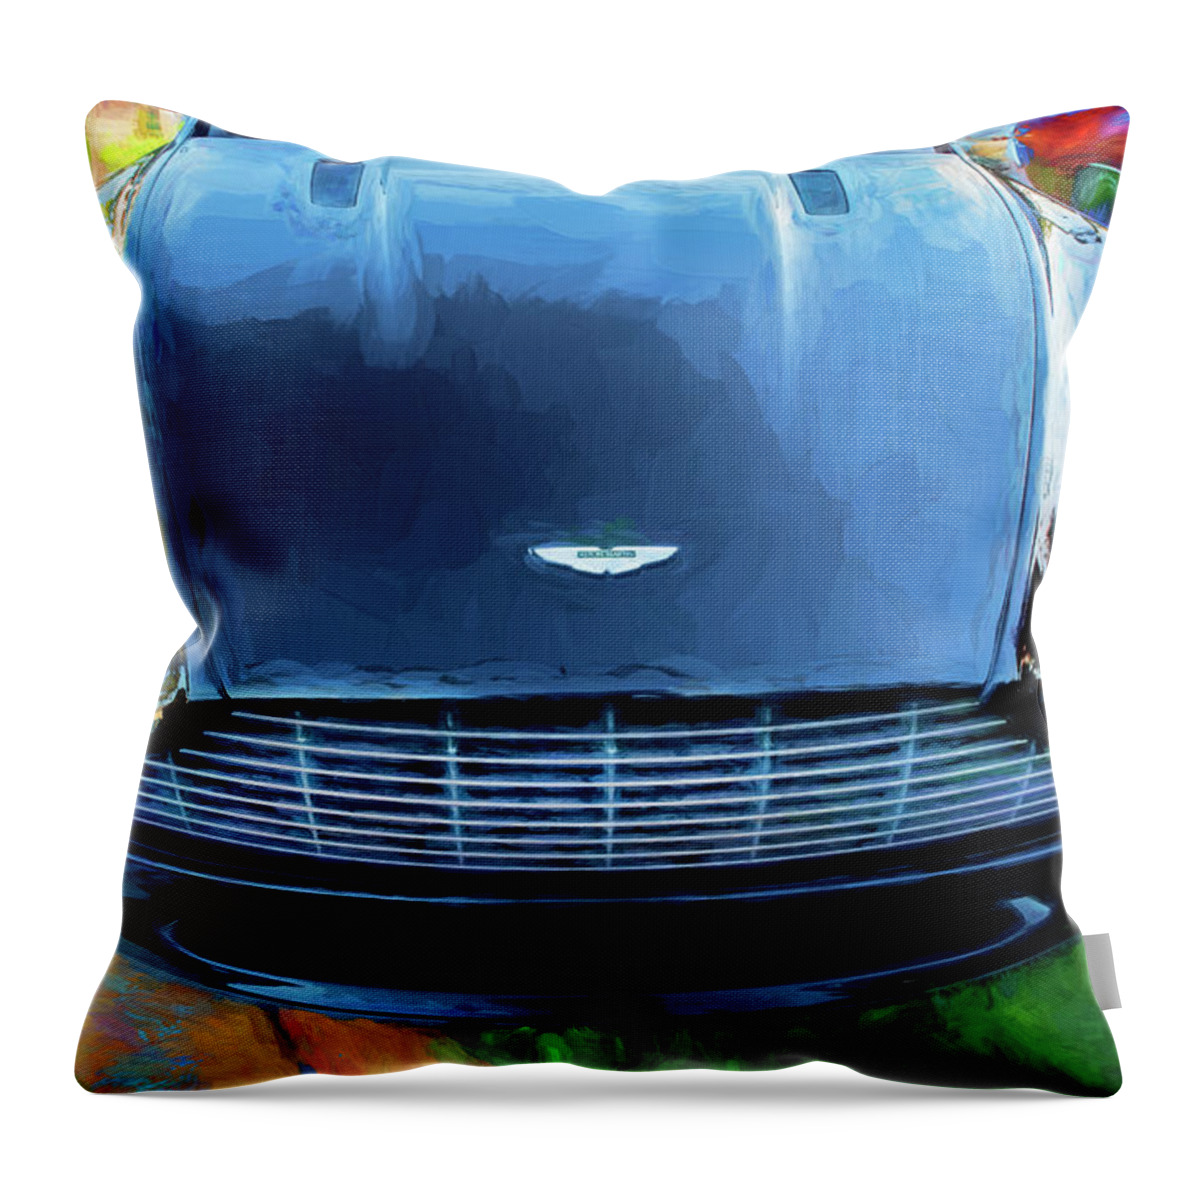 2007 Aston Martin V8 Vantage Roadster Throw Pillow featuring the photograph 2007 Aston Martin V8 Vantage Roadster 110 by Rich Franco